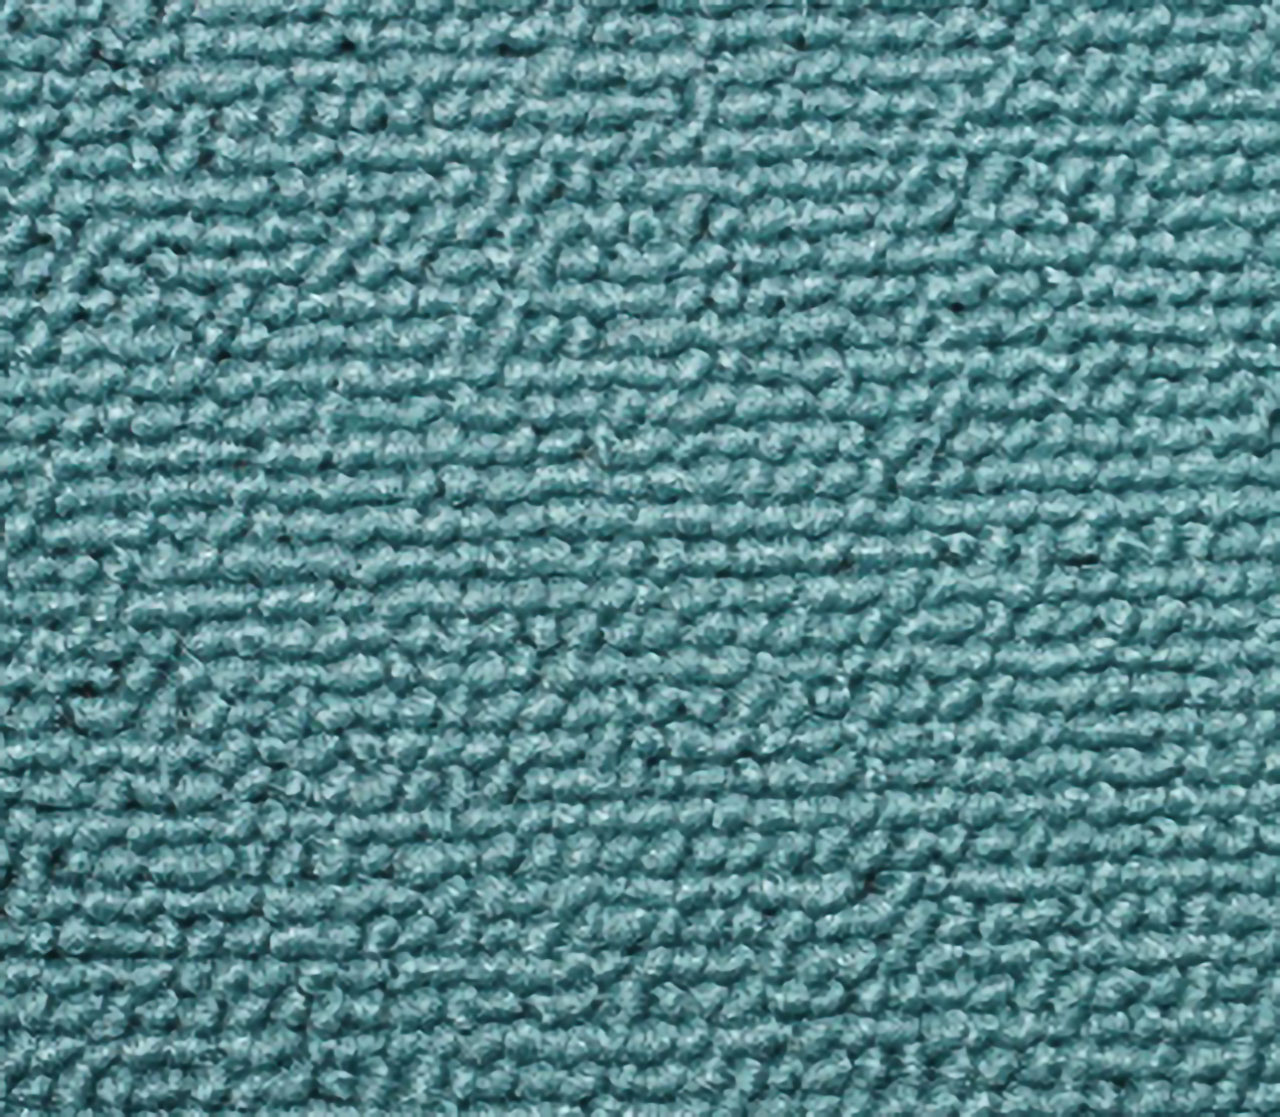 Holden Special EJ Special Wagon B21 Monaco & Geisha Turquoise with Feathertop Grey Carpet (Image 1 of 1)